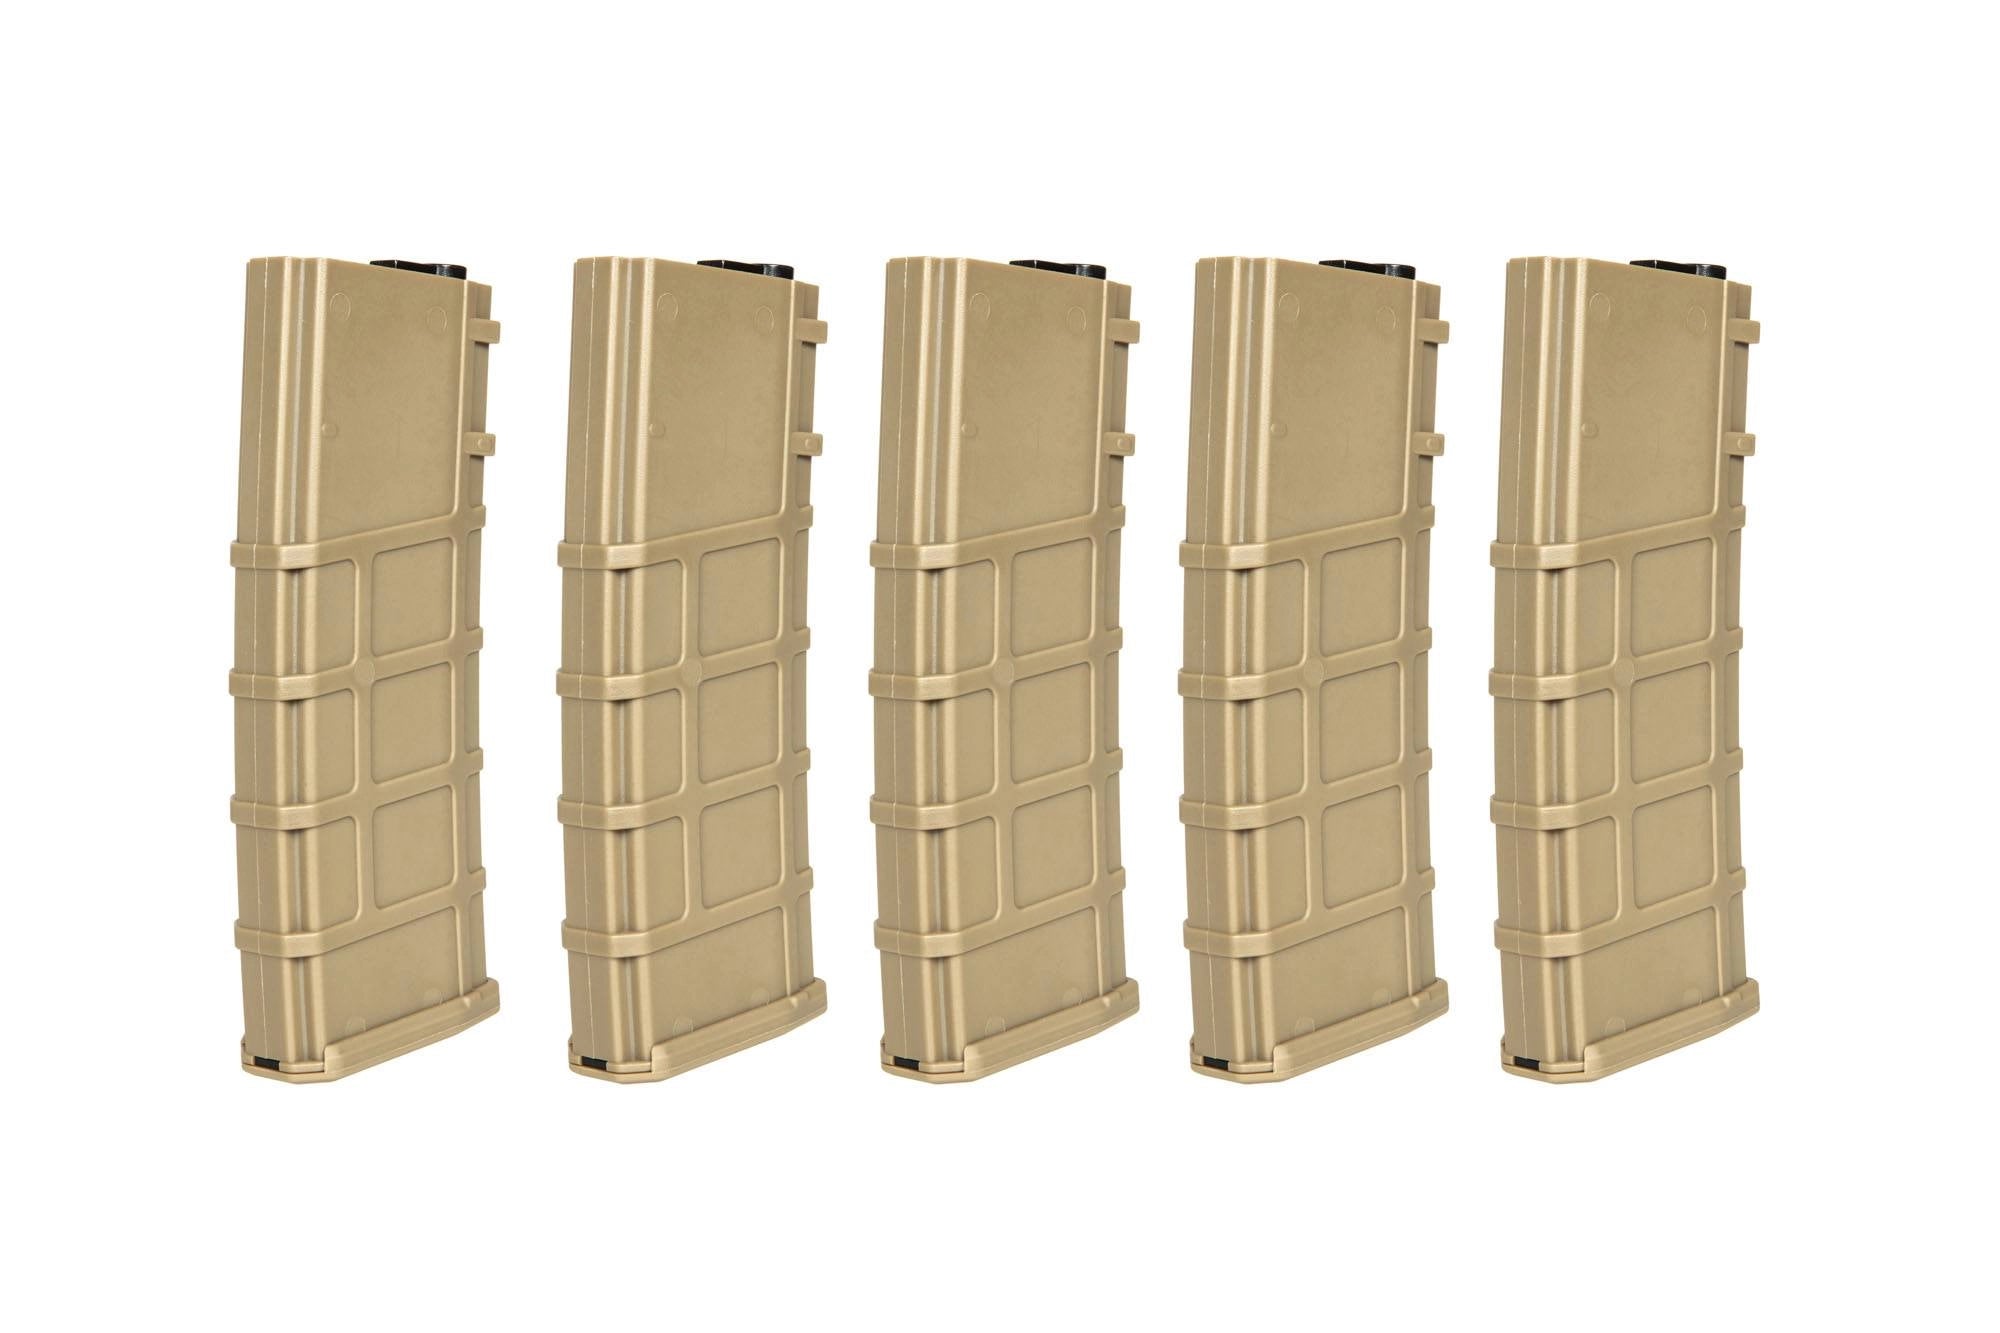 Set of 5 Polymer 200 BB's Mid-Cap magazines for M4/M16 replicas - Tan-1